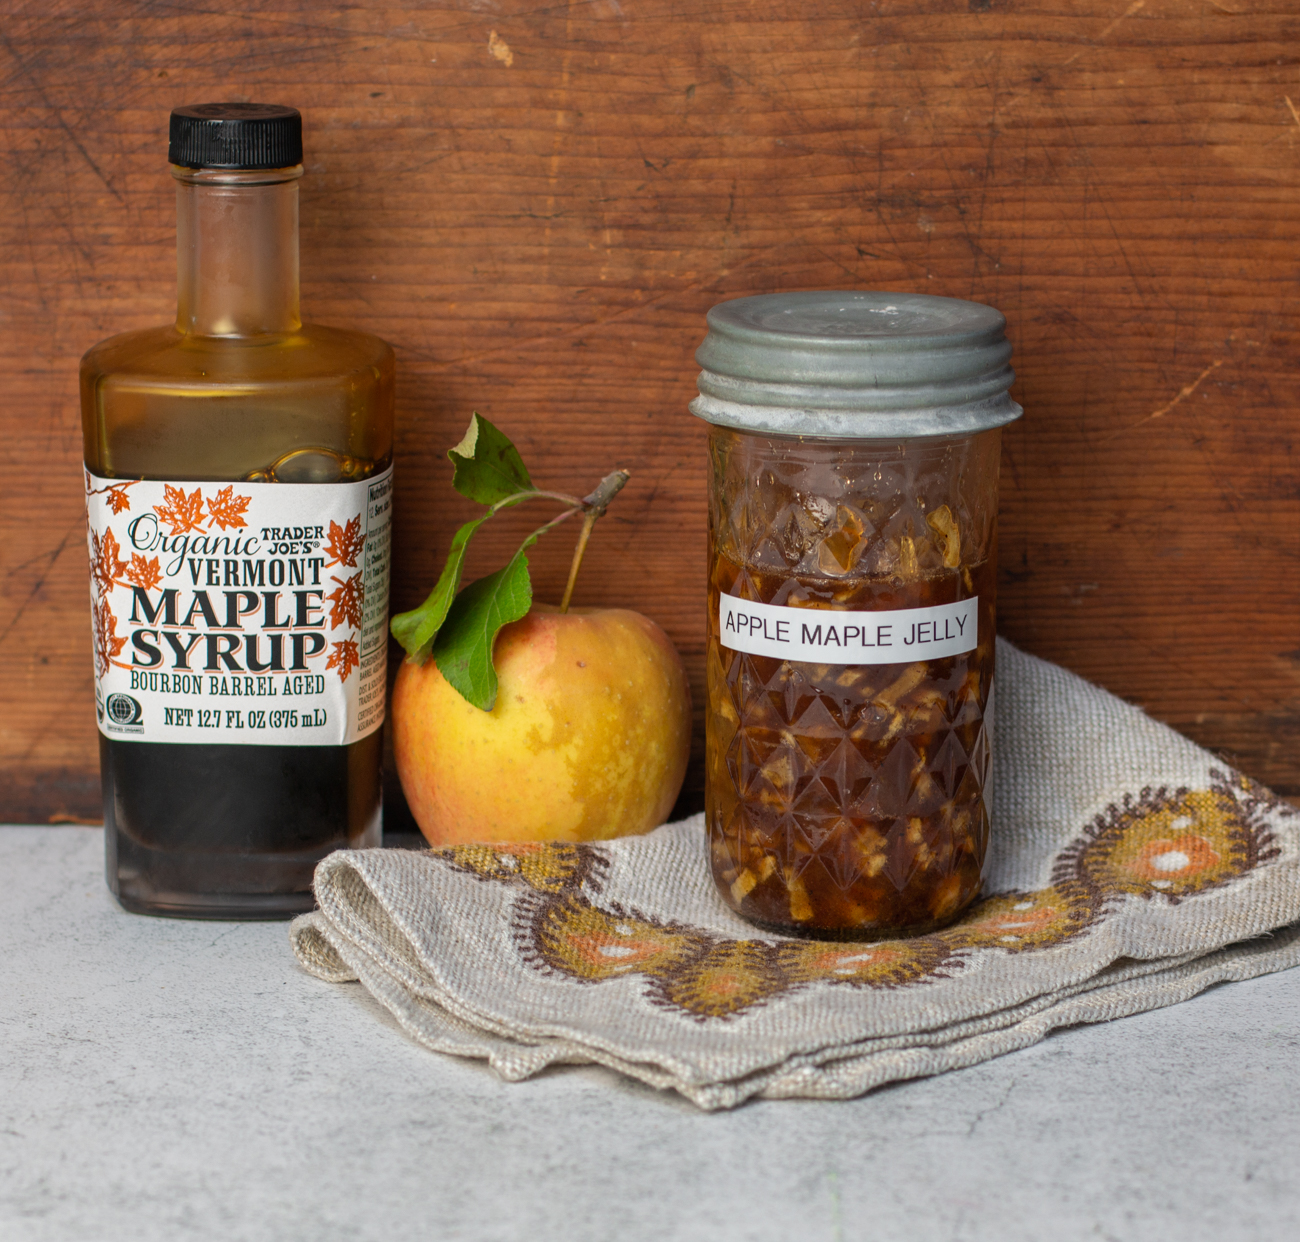 Karen's Chunky Apple Maple Jelly with Trader Joes' Bourbon Barrel Aged Maple Syrup 